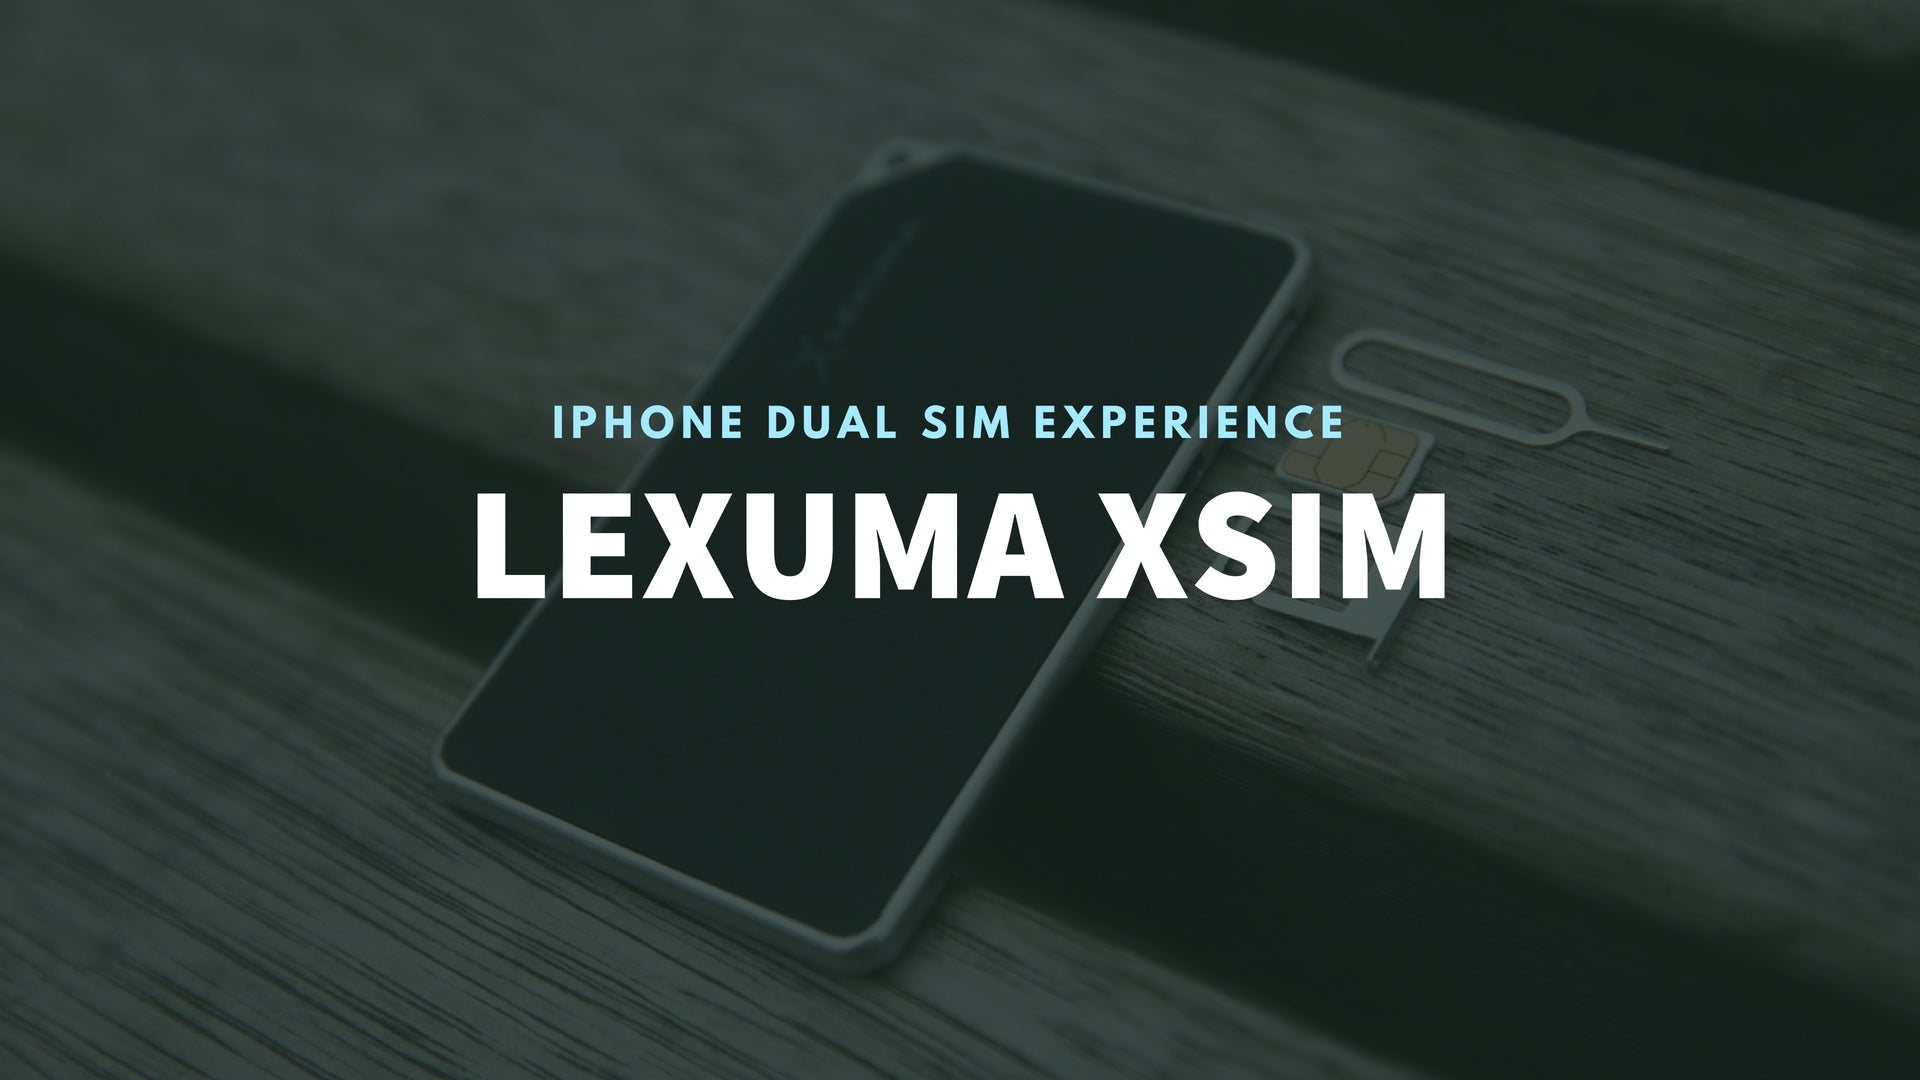 Lexuma XSIM XDS-1220 Portable Wireless Bluetooth iPhone Extension Dual SIM Adapter 2 sim iphone dual sim iphone 5s morecard app bluetooth dual sim adapter android multi sim adaptor dual sim adapter bluetooth android magic sim review dual sim iphone 6 simultaneously dual sim adapter active at the same time iphone 7 dual sim case bluetooth sim adapter for android ikos k1s worldsim duet review piece dual sim simplus app iphone 8 dual sim case dual sim adapter goodtalk s socblue a810 dual sim adapters do they work mokablue review iphone app dual sim iphone dual sim dual active ikos bluetooth dual sim adapter simore e clips review simore iphone 7 dual sim iphone list bluetooth sim adapter bluetooth dual sim adapter android iphone sim adapter iphone 7 dual sim simultaneous bluetooth sim adapter for android dual sim adapter both active ikos dual sim adapter review dual sim box banner review